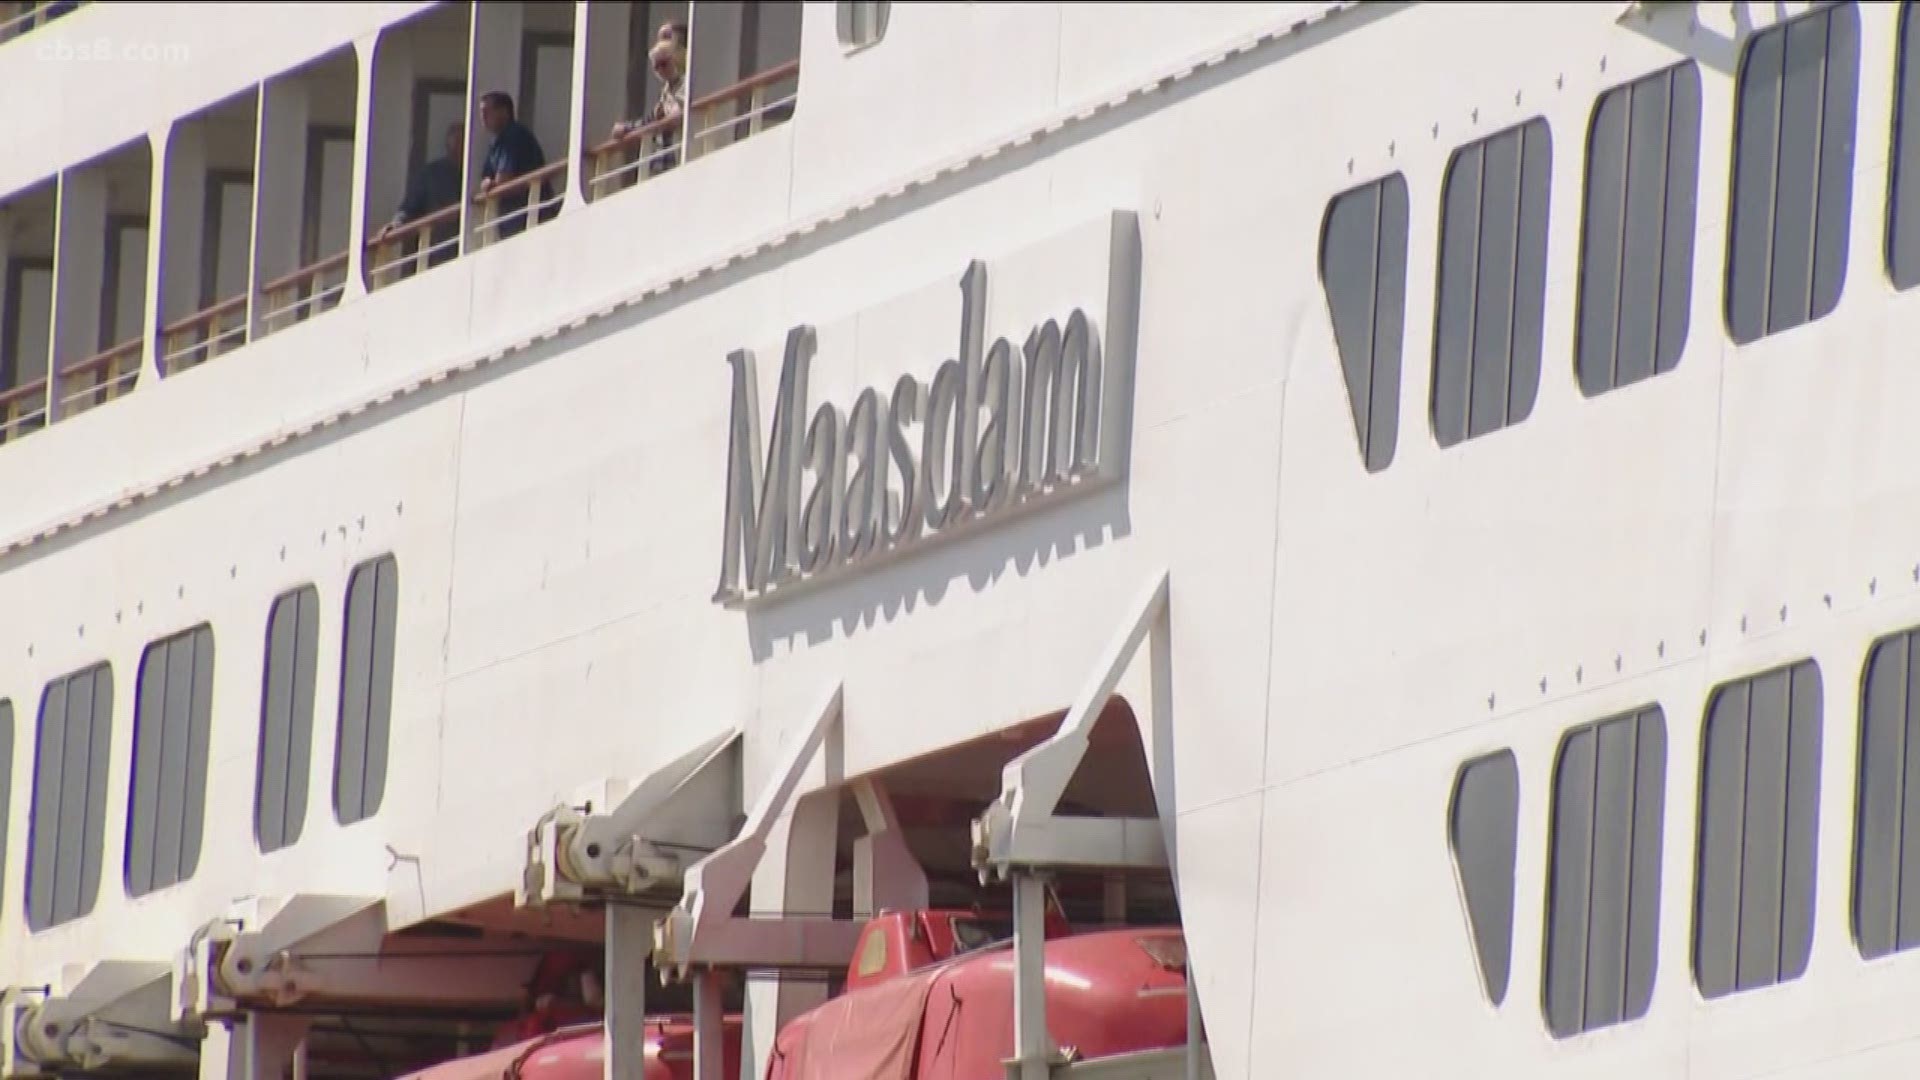 Maasdam left Auckland, New Zealand on March 1 and was sailing a New Zealand and South Pacific crossing cruise that was scheduled to end in San Diego on April 3.